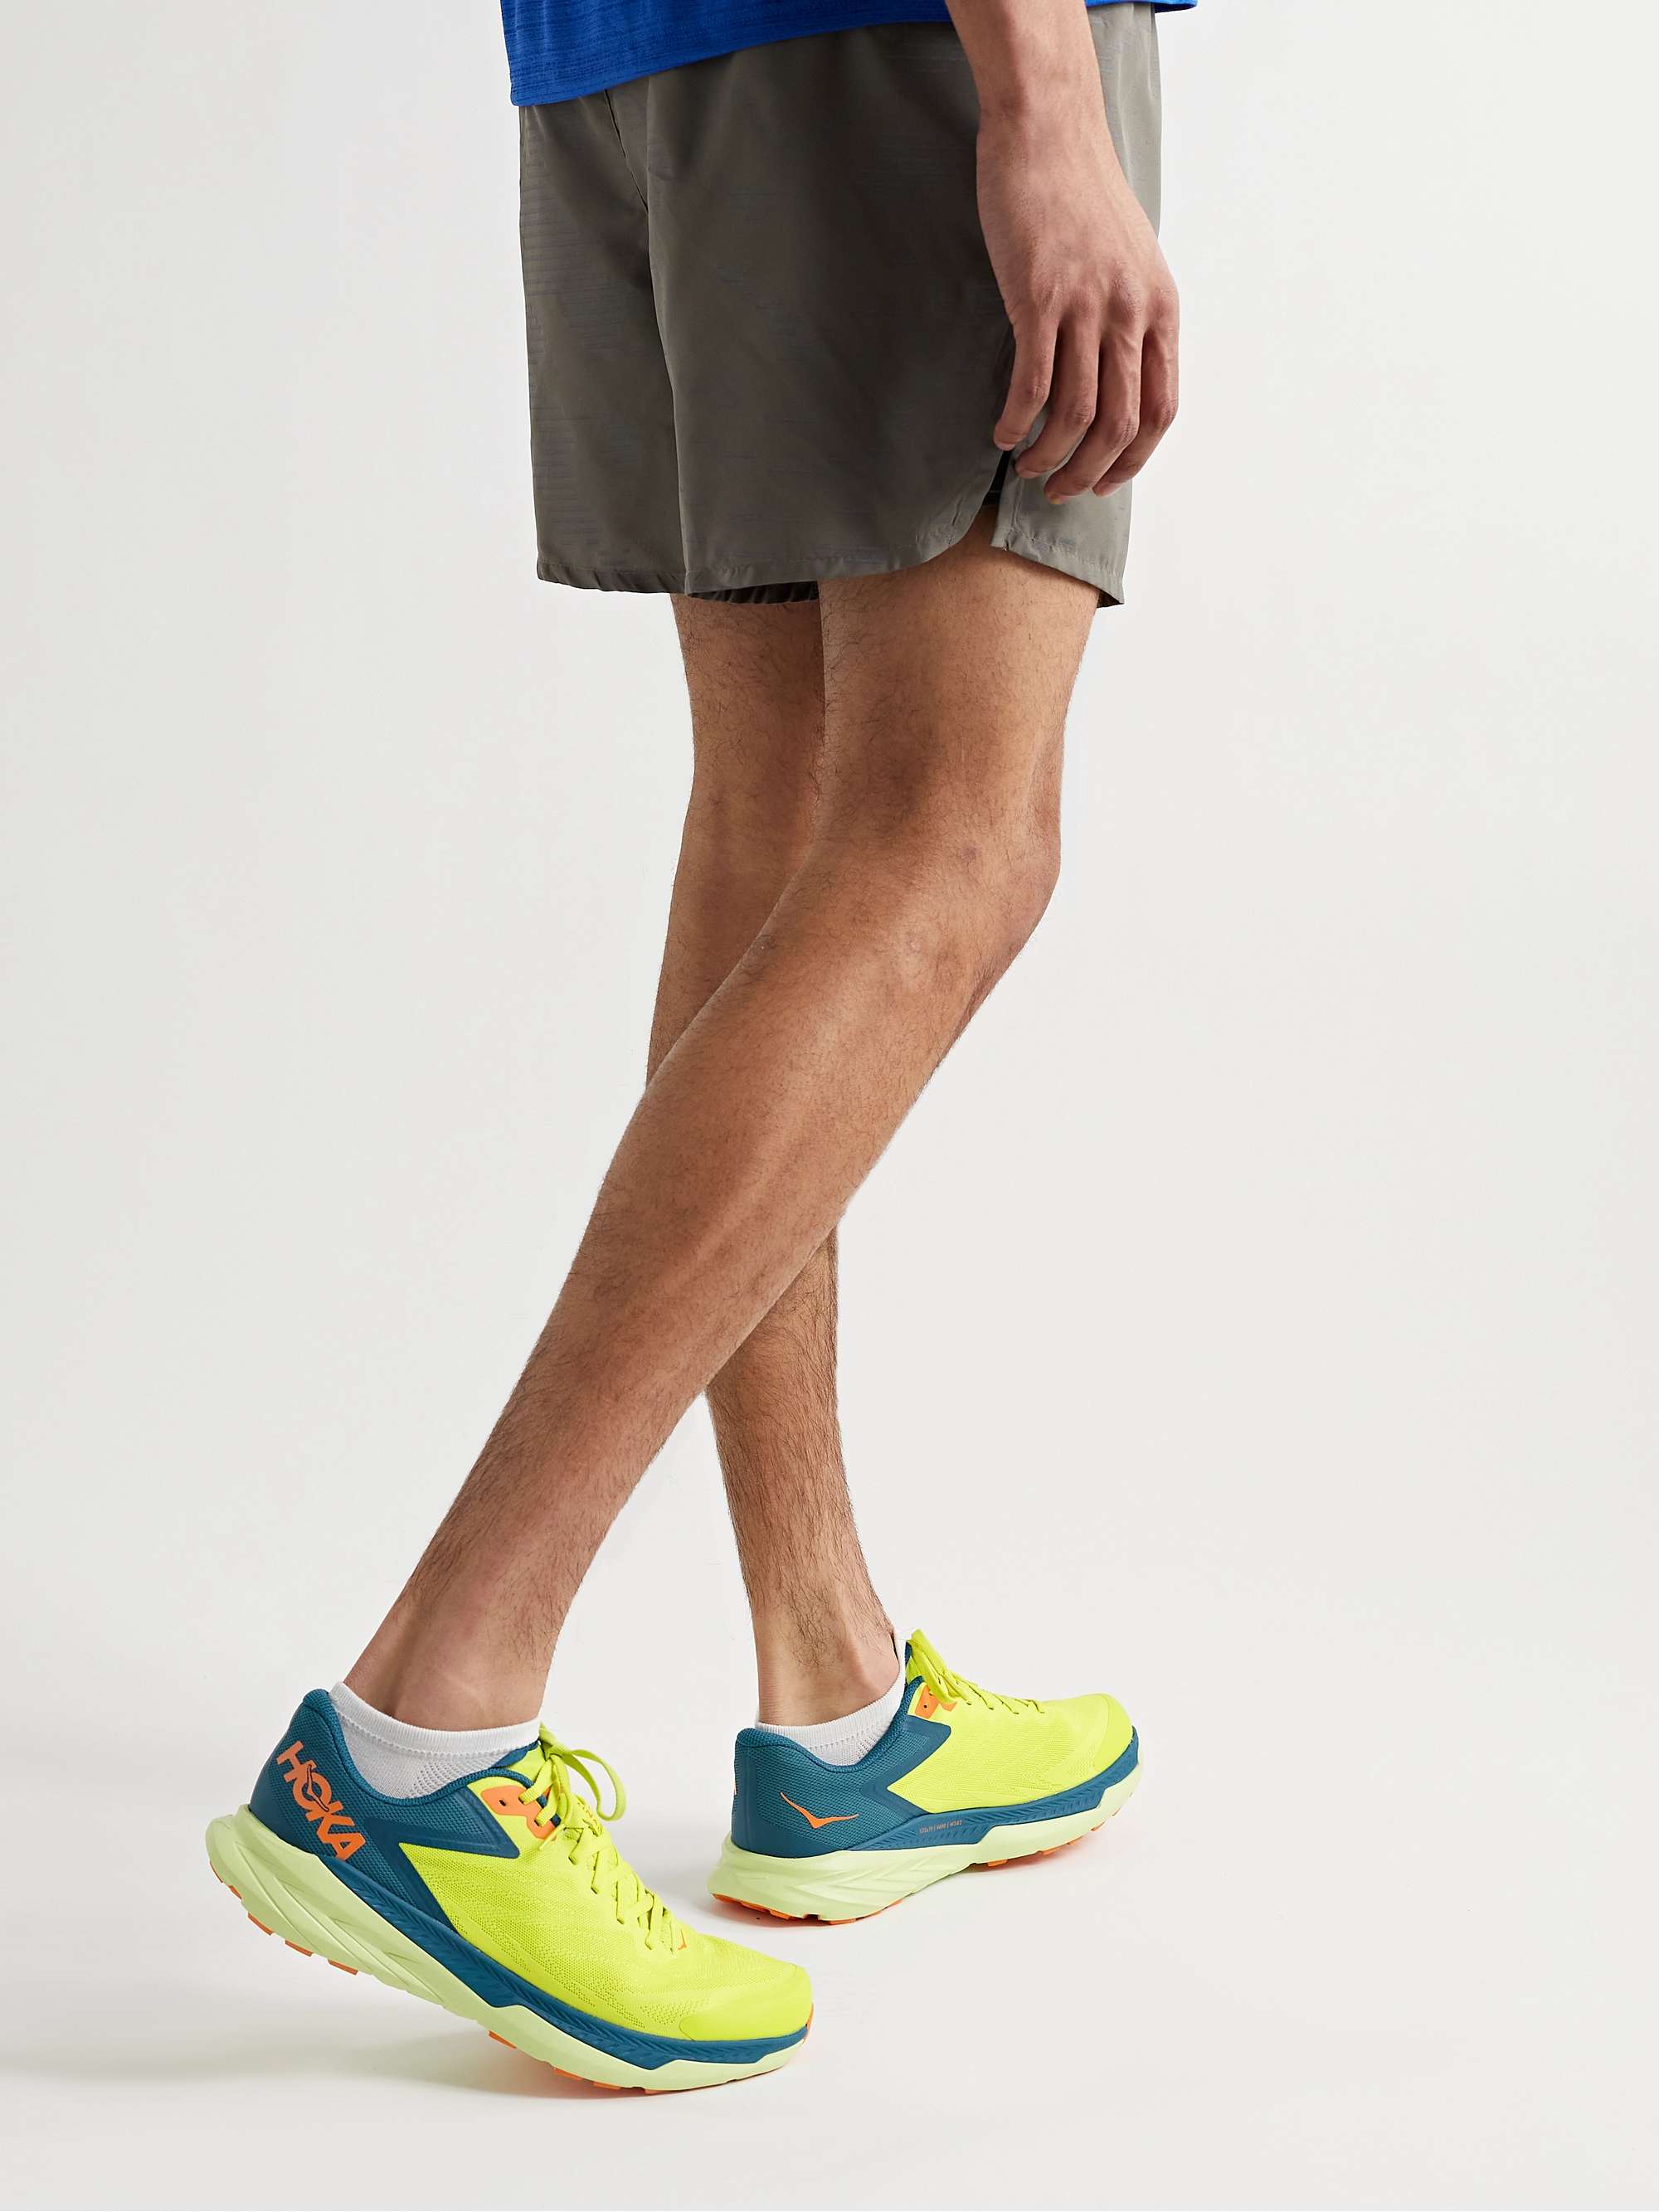 Chartreuse Zinal Rubber-Trimmed Mesh Running Sneakers | HOKA ONE ONE | MR  PORTER